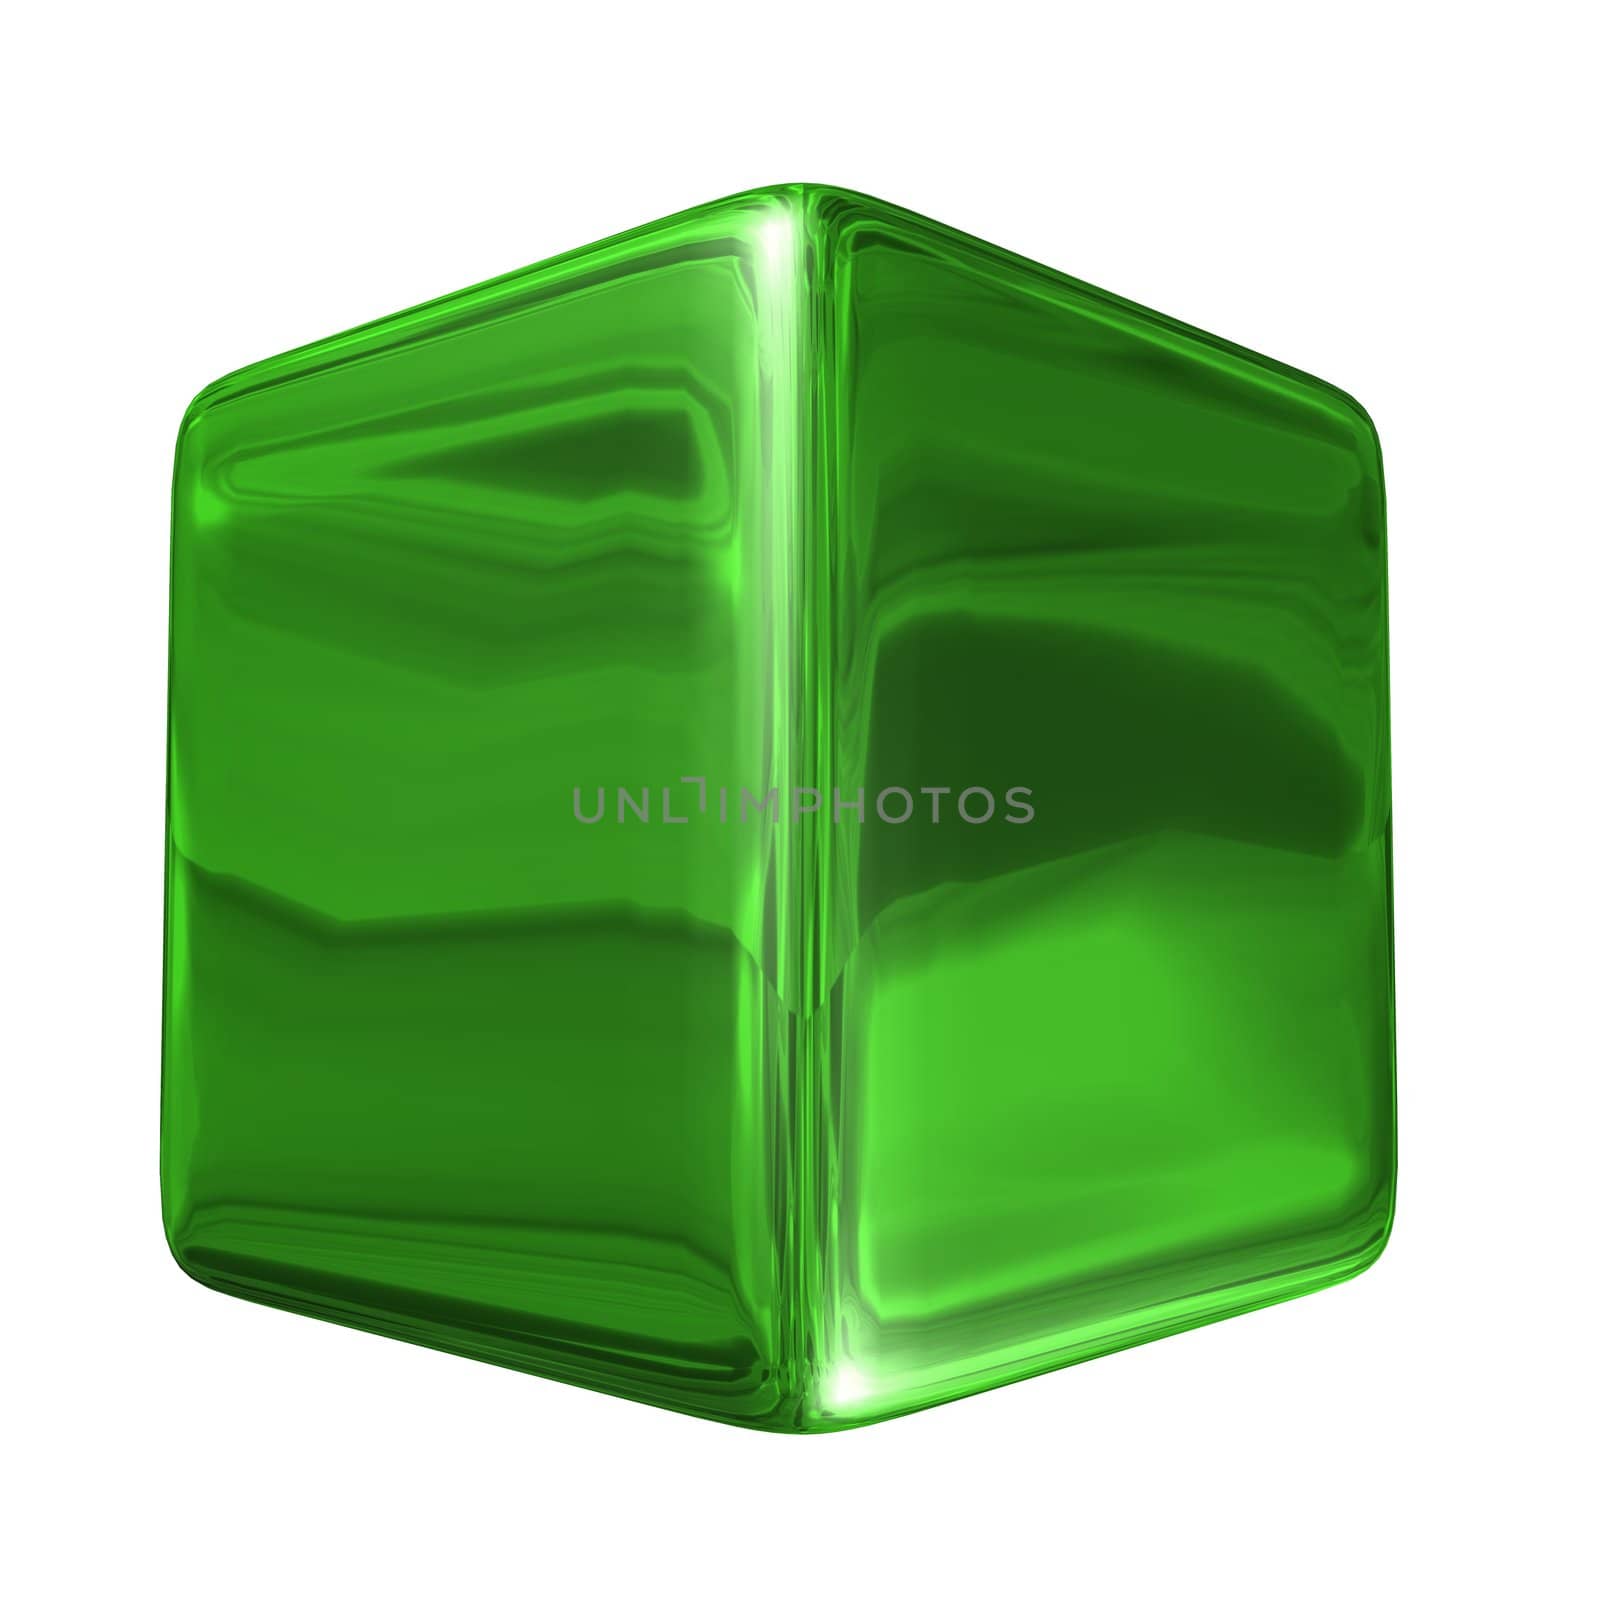 An abstract illustration of cubes on a white background